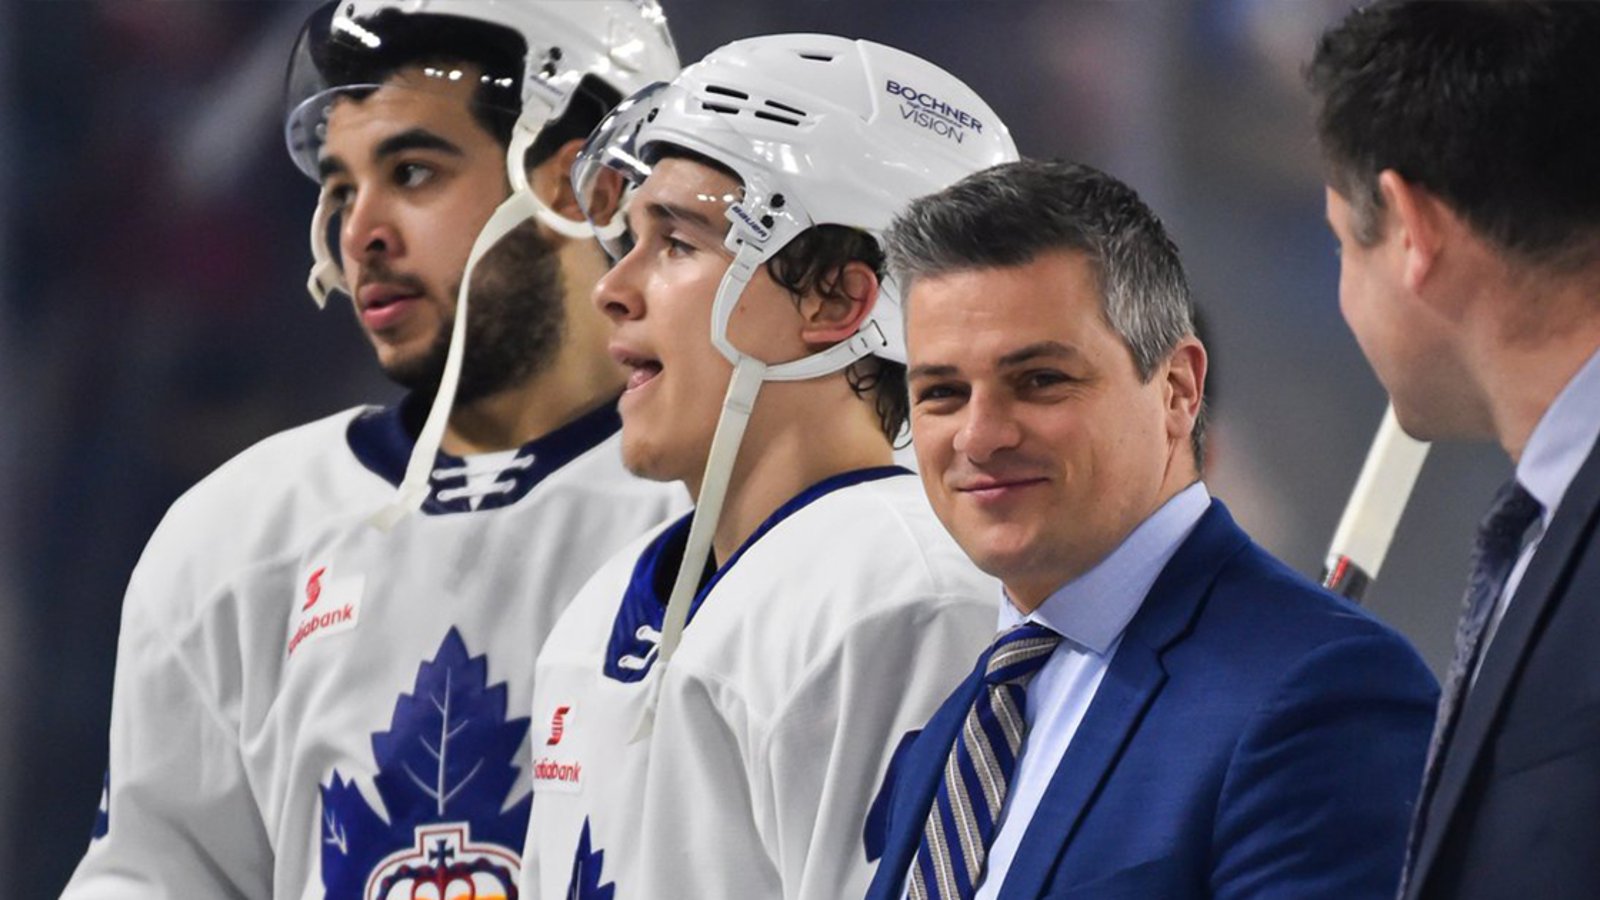 Breaking: Leafs finally make a move with AHL coach Sheldon Keefe